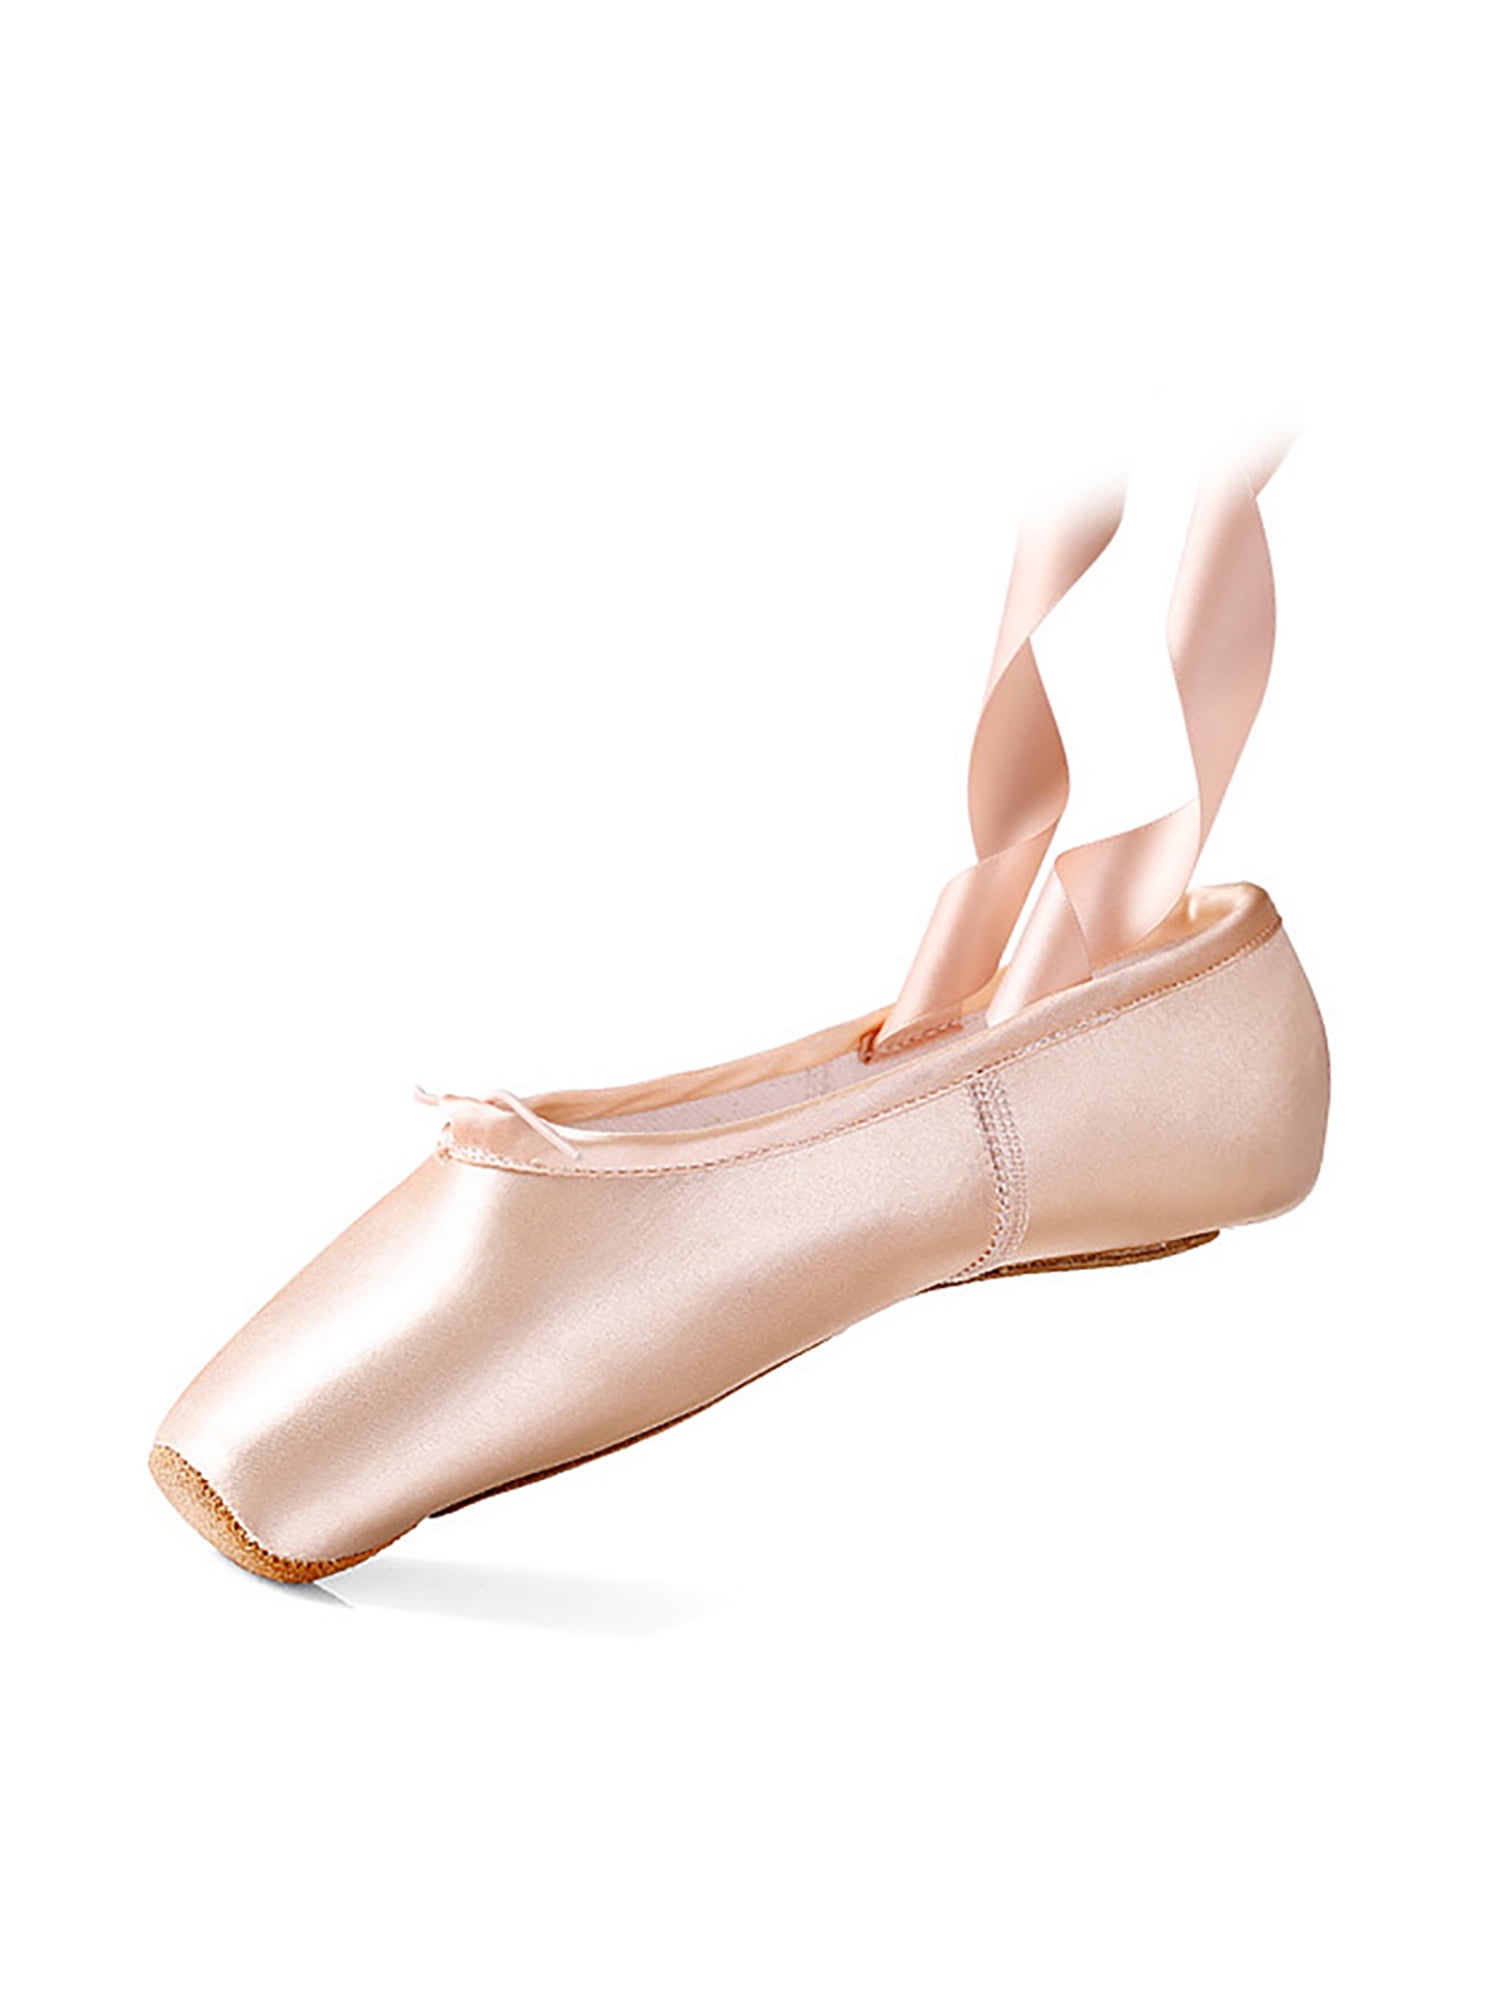 Dynadans PU Leather Ballet Shoes/Ballet Slippers/Dance Shoes for Girls and Women